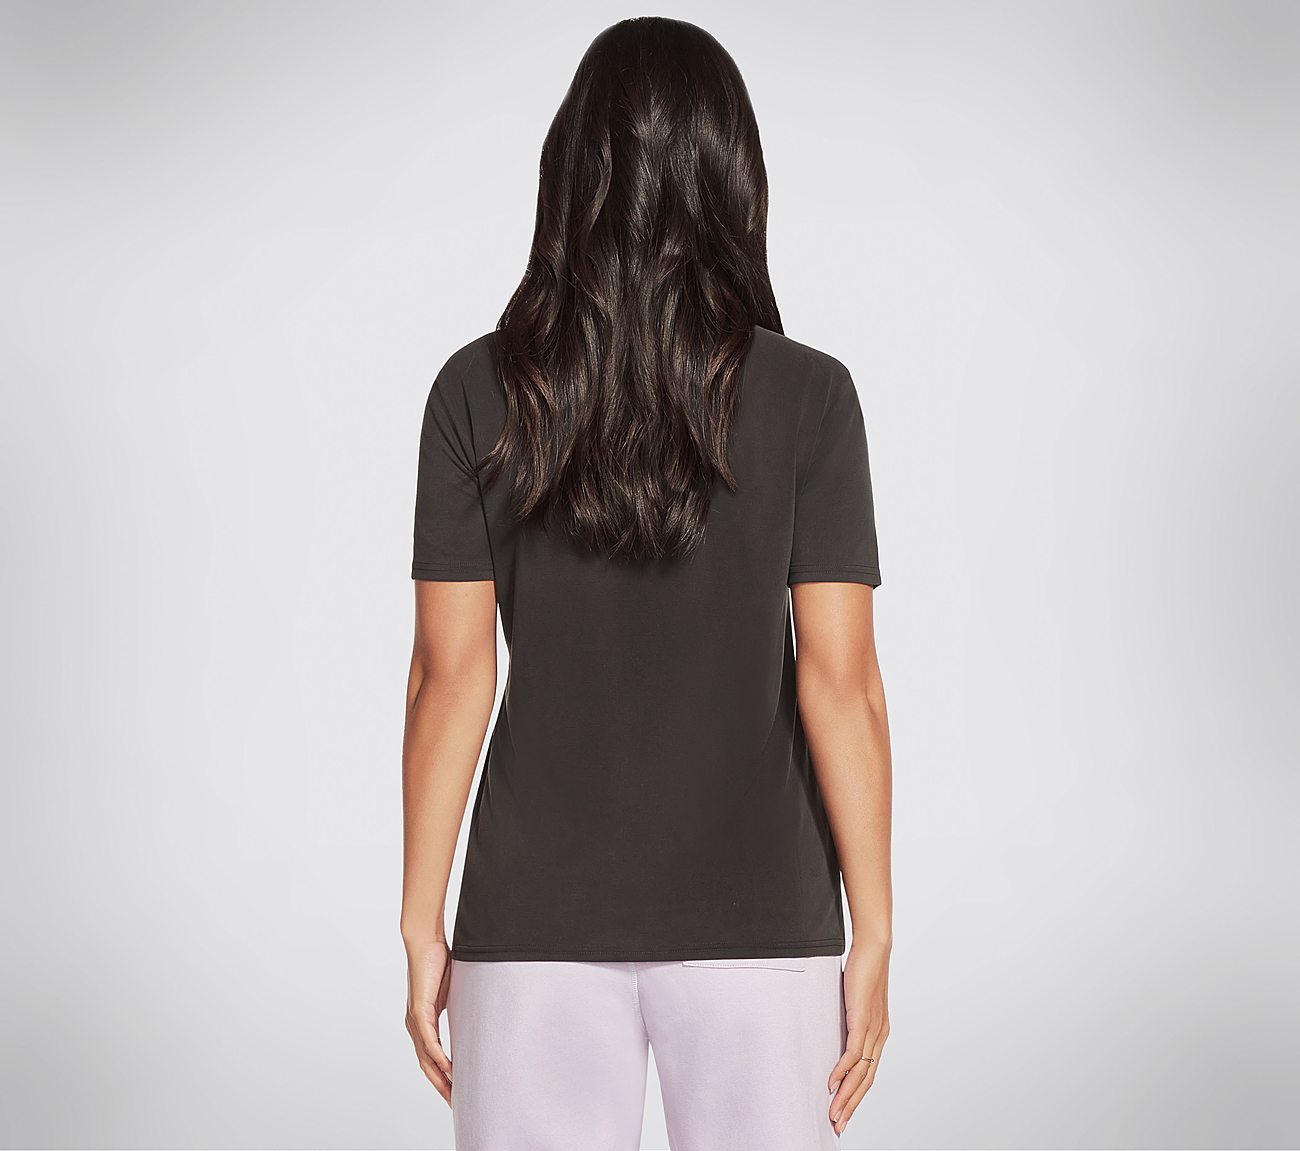 TRANQUIL POCKET TEE, GREY Apparel Top View